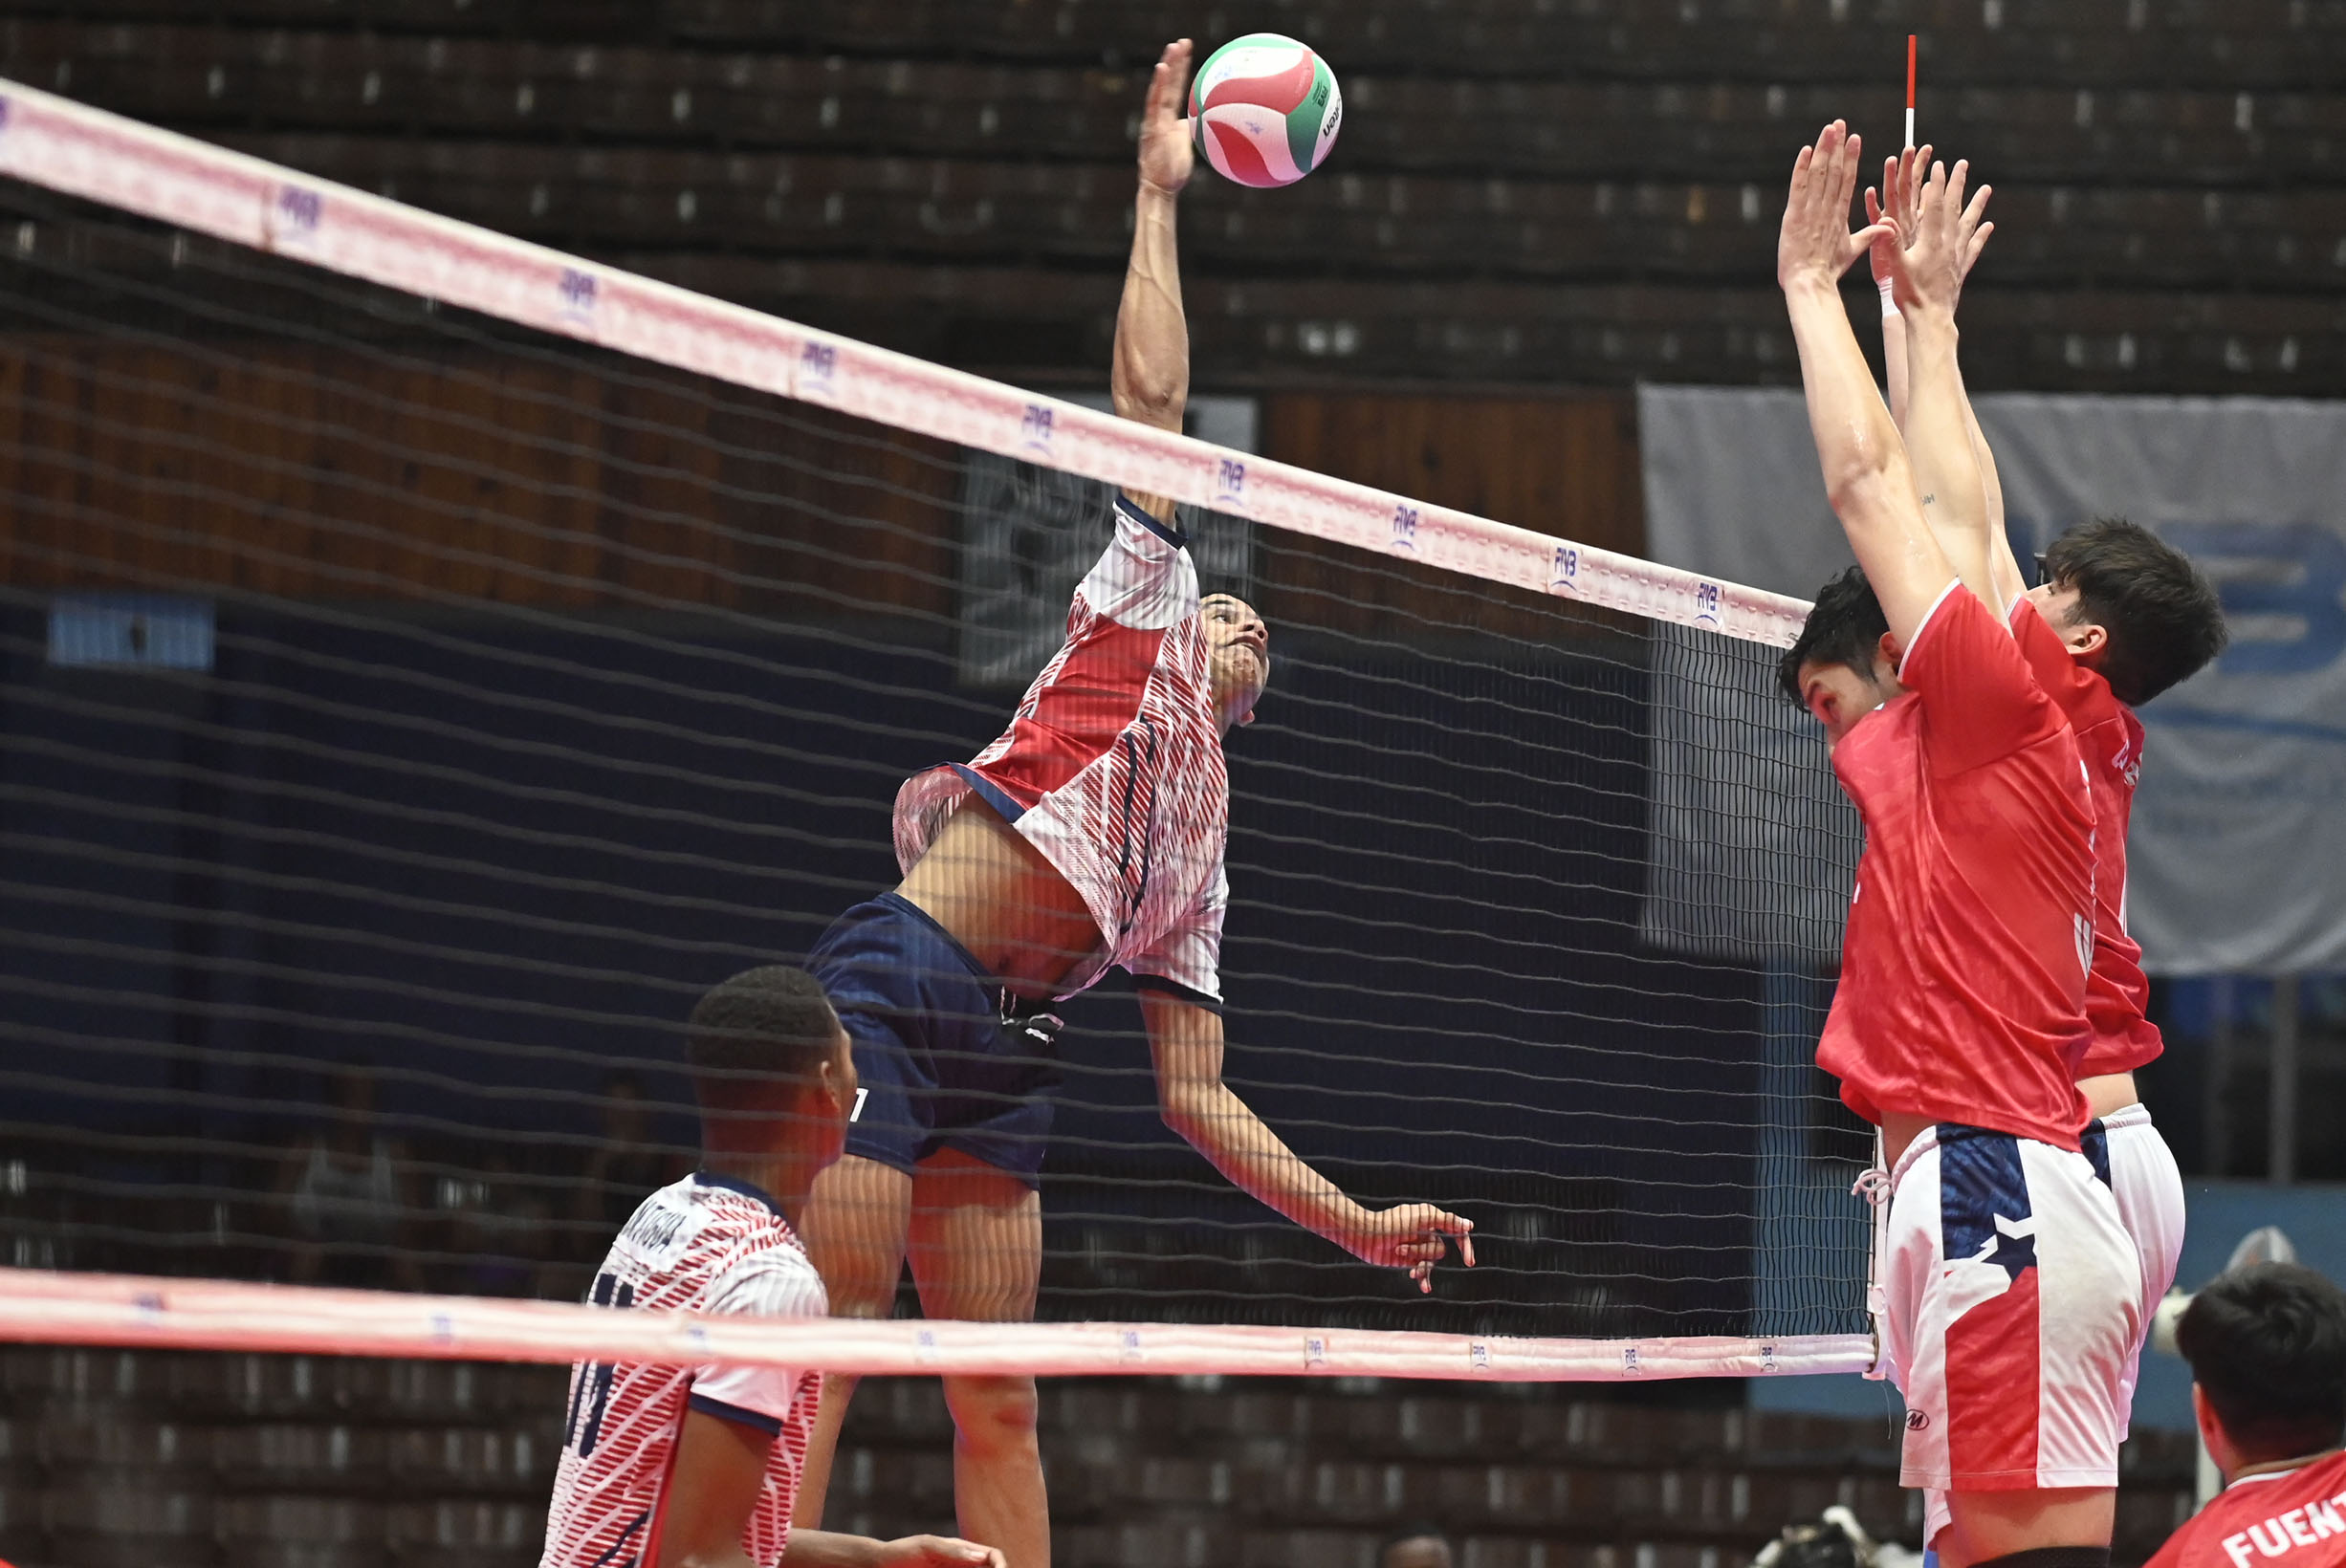 Dominican Republic fifth place at U21 Pan Am Cup